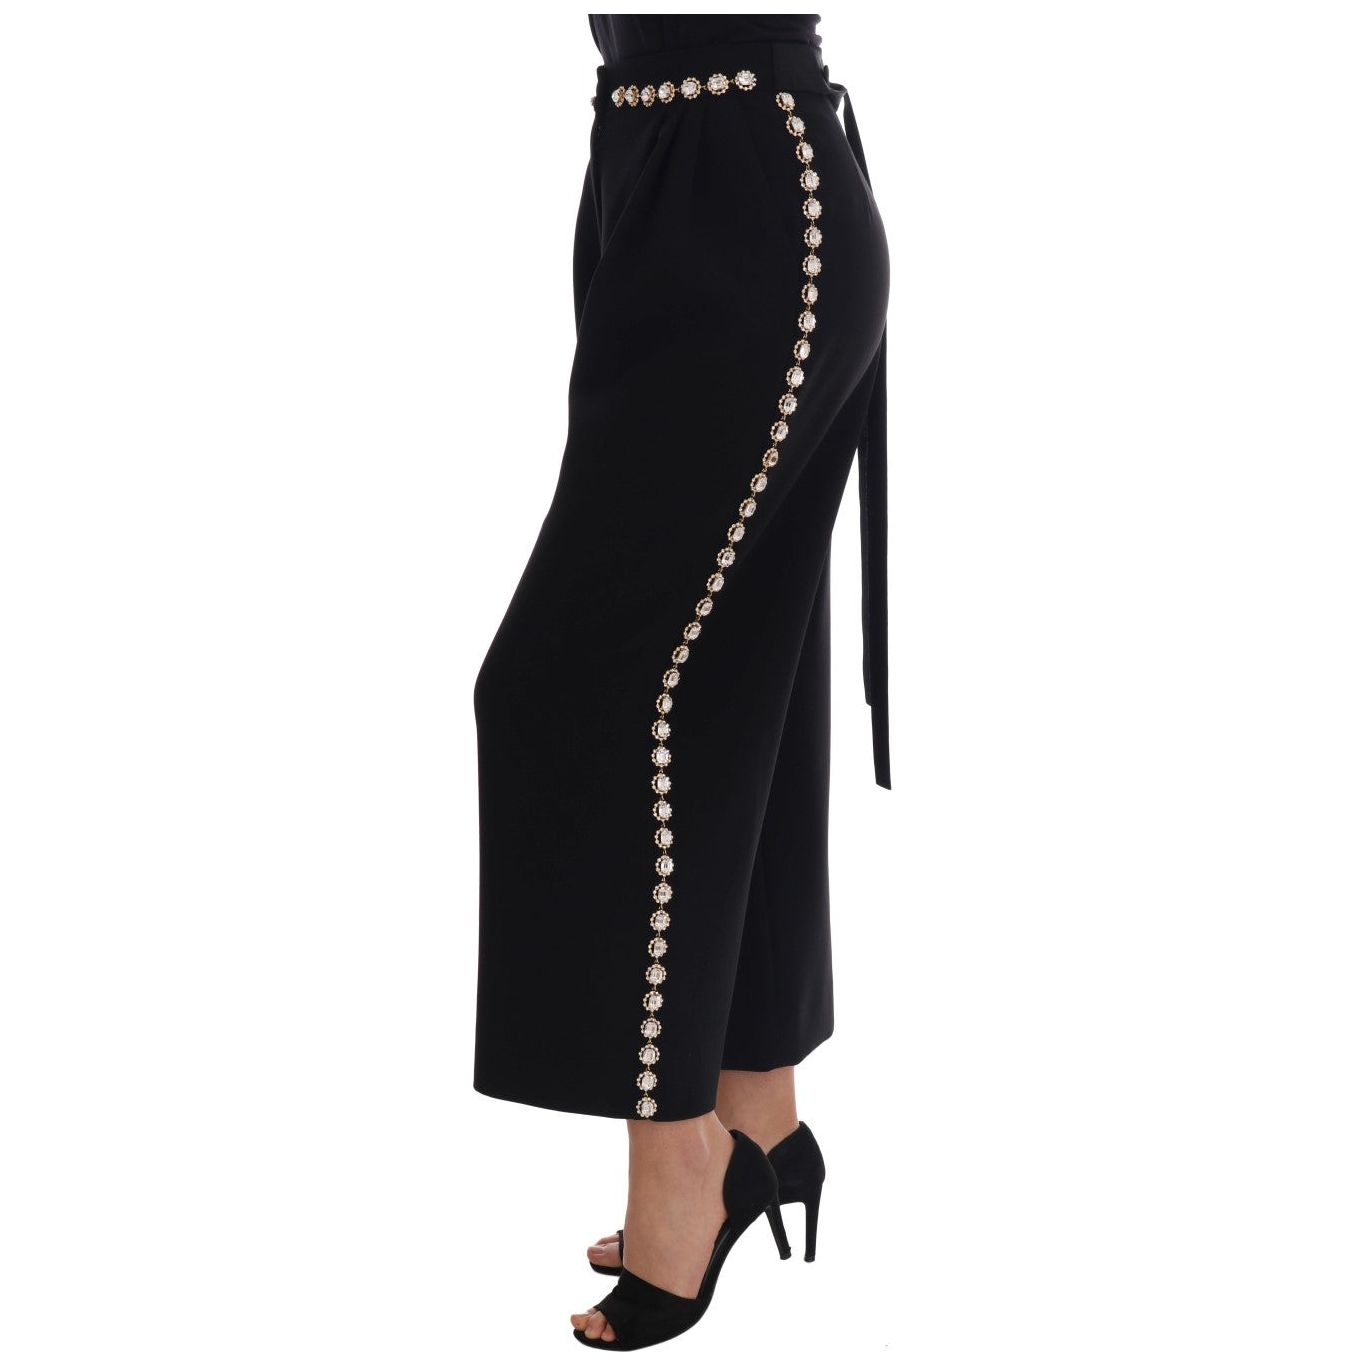 Dolce & Gabbana Elegant High-Waist Ankle Pants with Gold Detailing Jeans & Pants black-wool-stretch-crystal-pants 513120-black-wool-stretch-crystal-pants-1.jpg